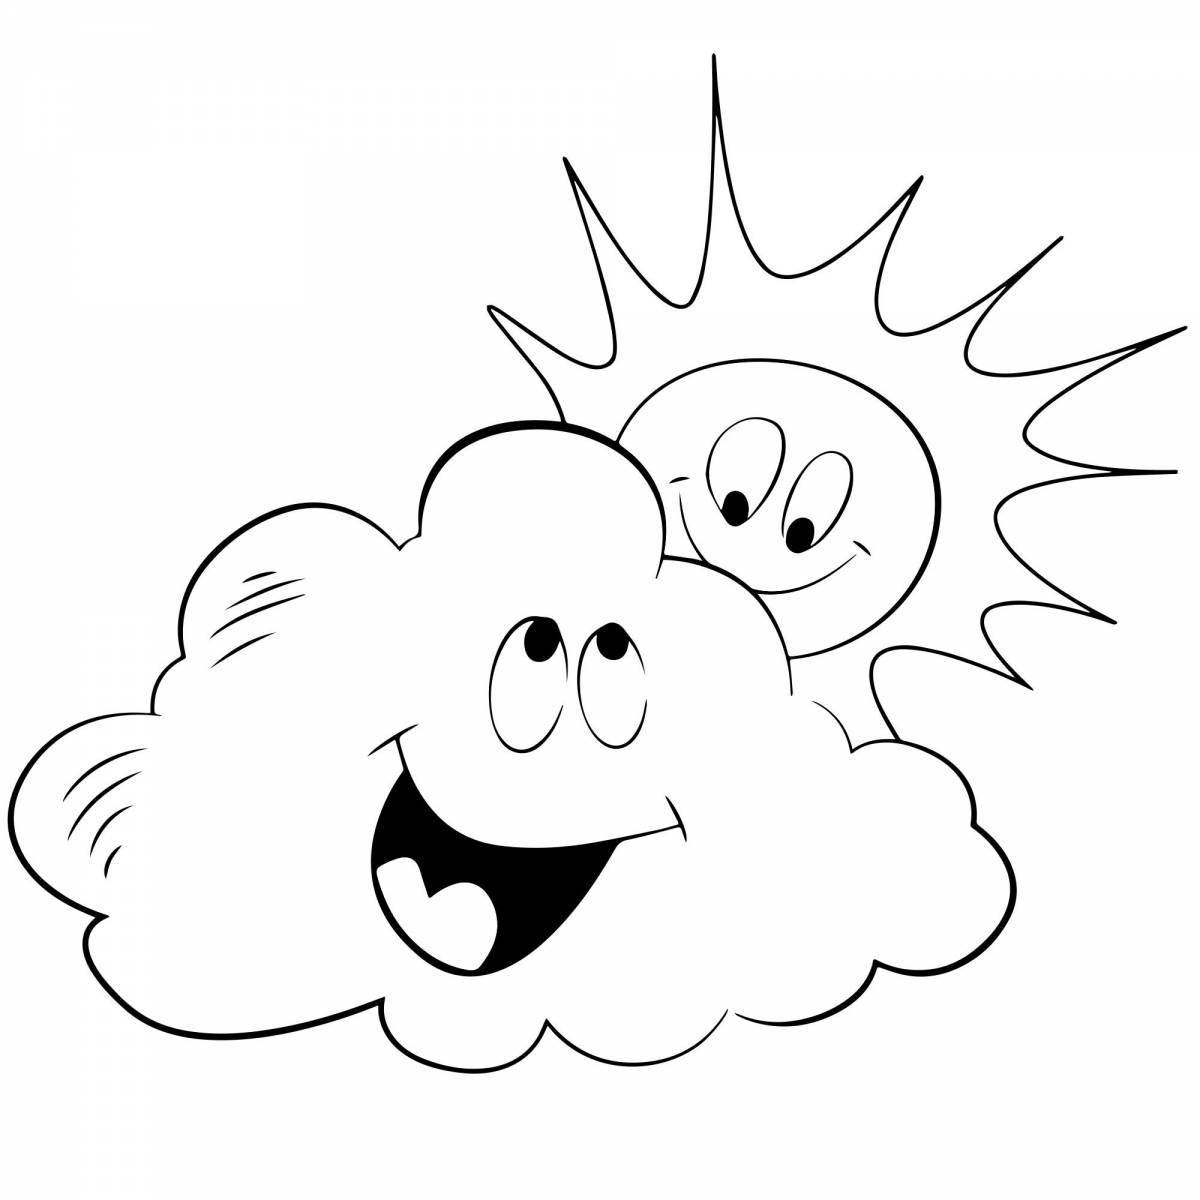 Coloring book sunny cloud for kids